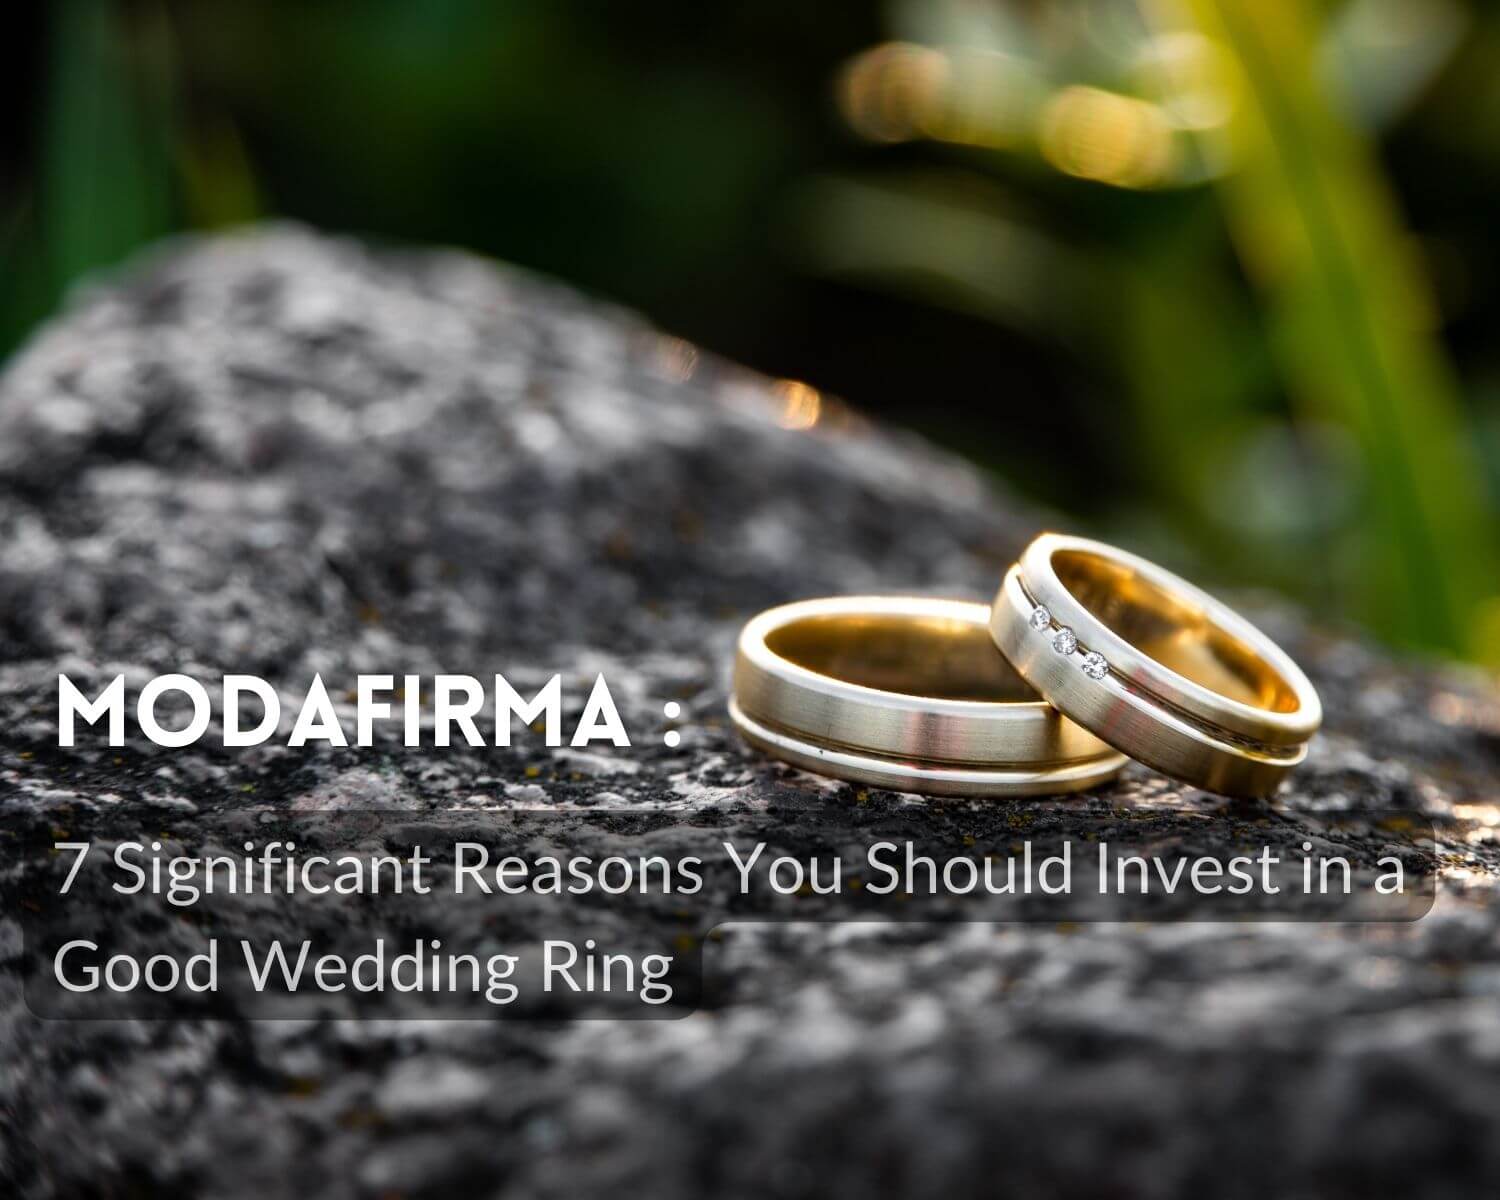 Wedding Rings | 7 Significant Reasons You Should Invest